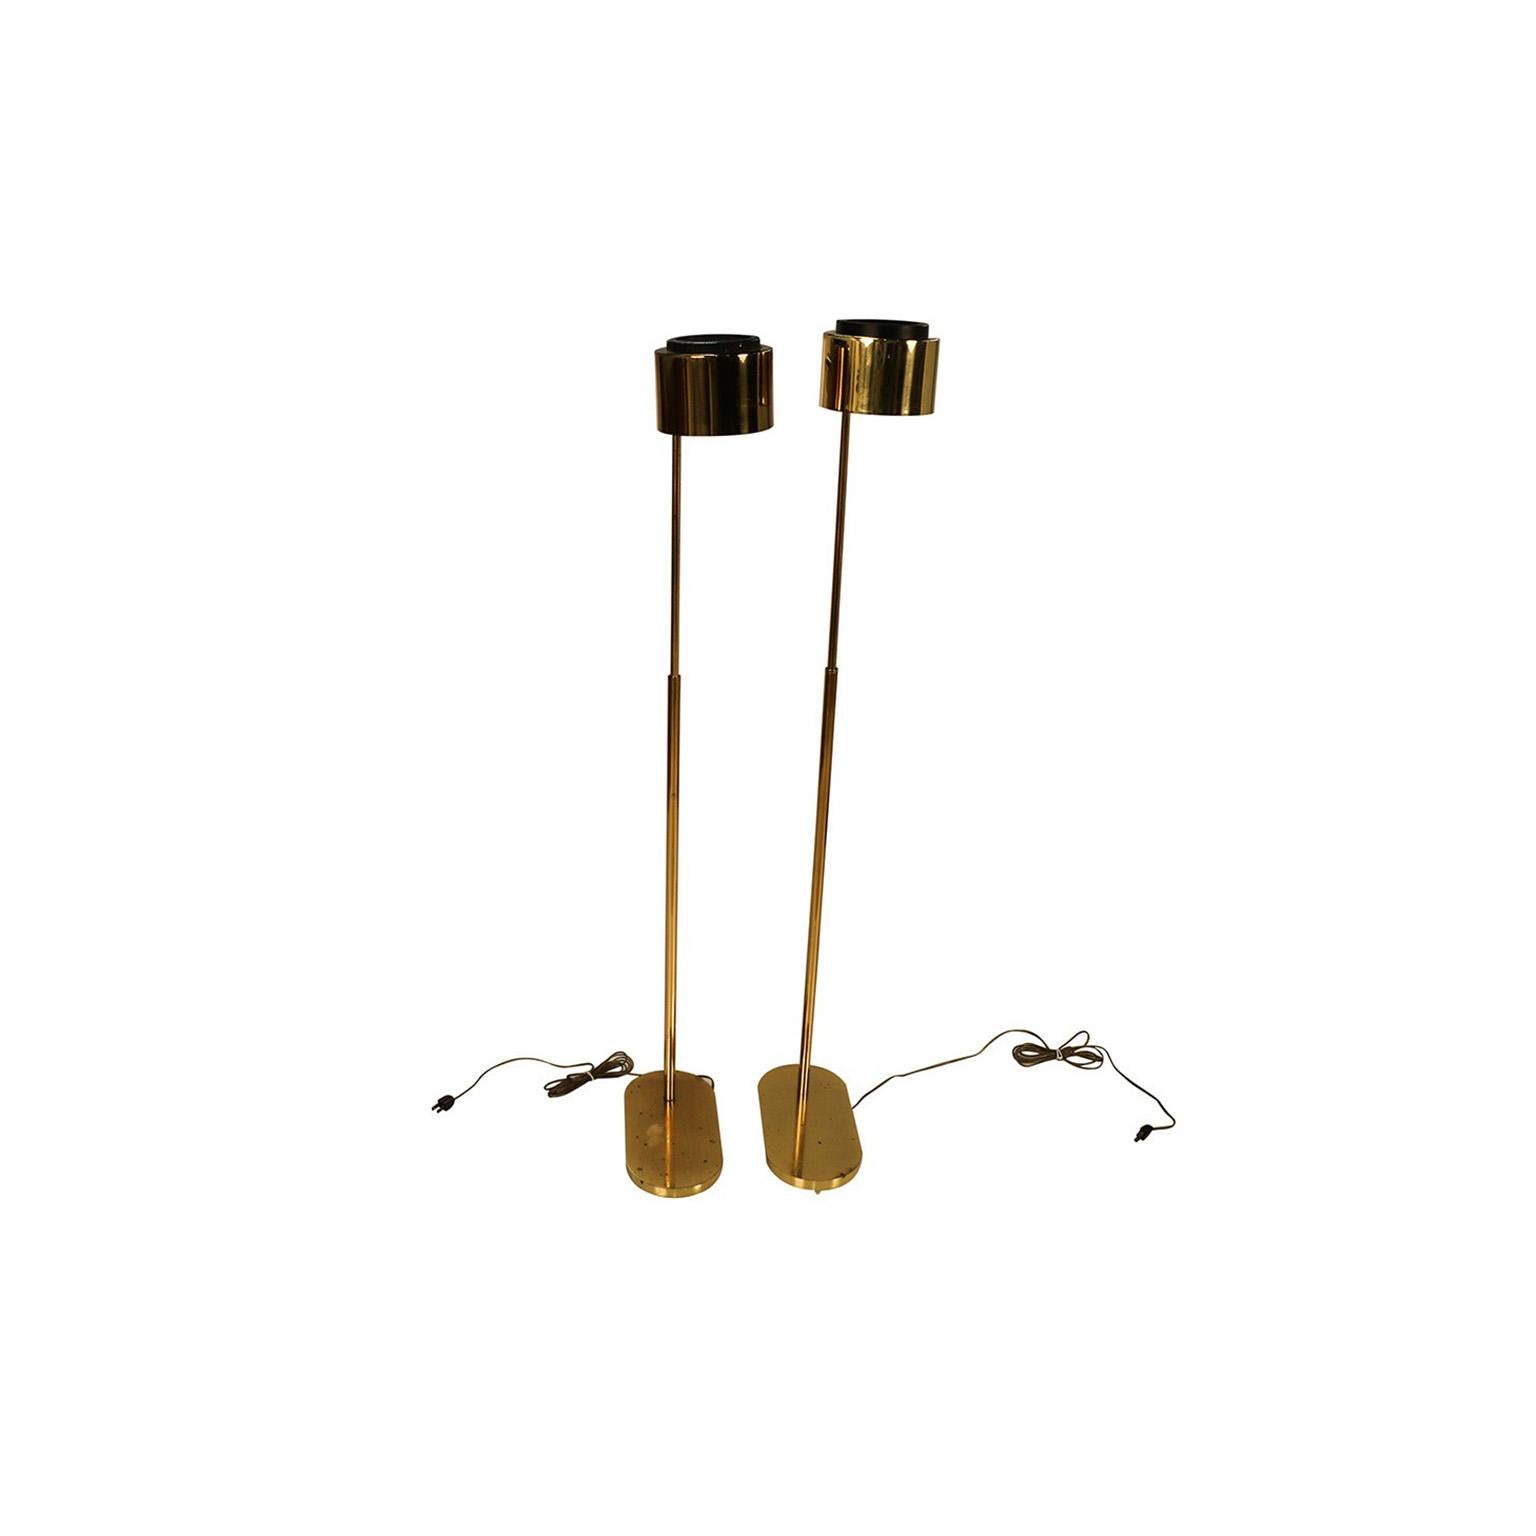 Magnificent pair of brass adjustable pharmacy floor lamps designed by Jon Norman for Casella Lighting. Each is impeccably constructed of brass. The heavy oval base supports an adjustable neck that’s finished with a cylindrical brass shade and black